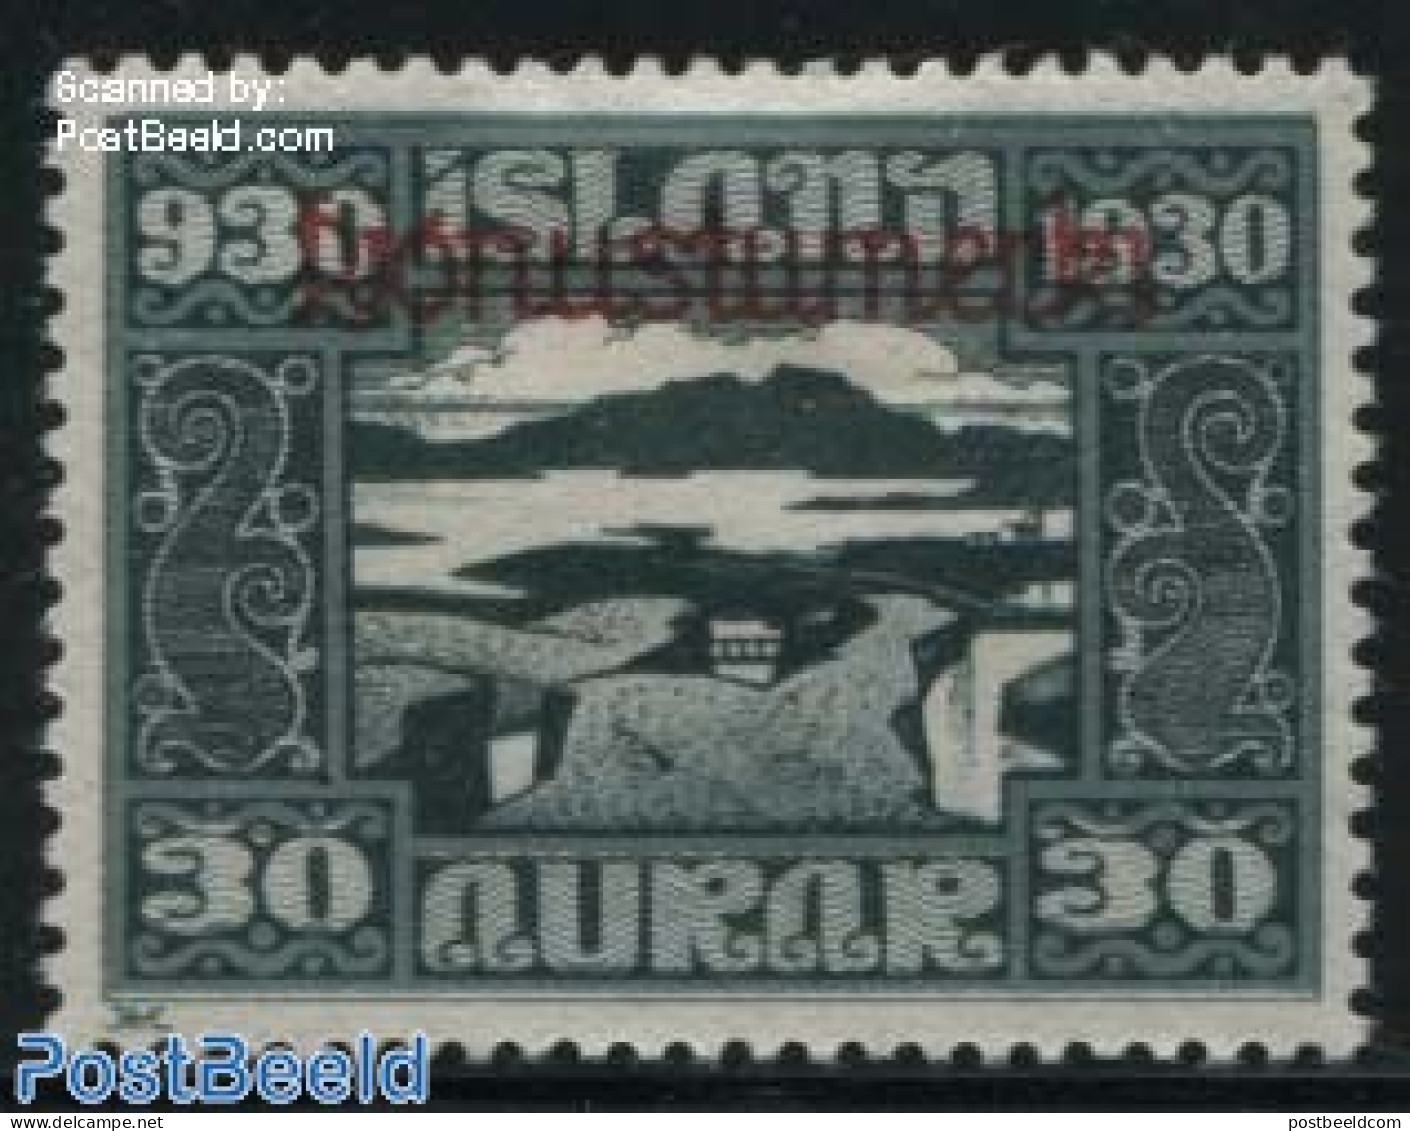 Iceland 1930 30A, Stamp Out Of Set, Unused (hinged) - Nuevos